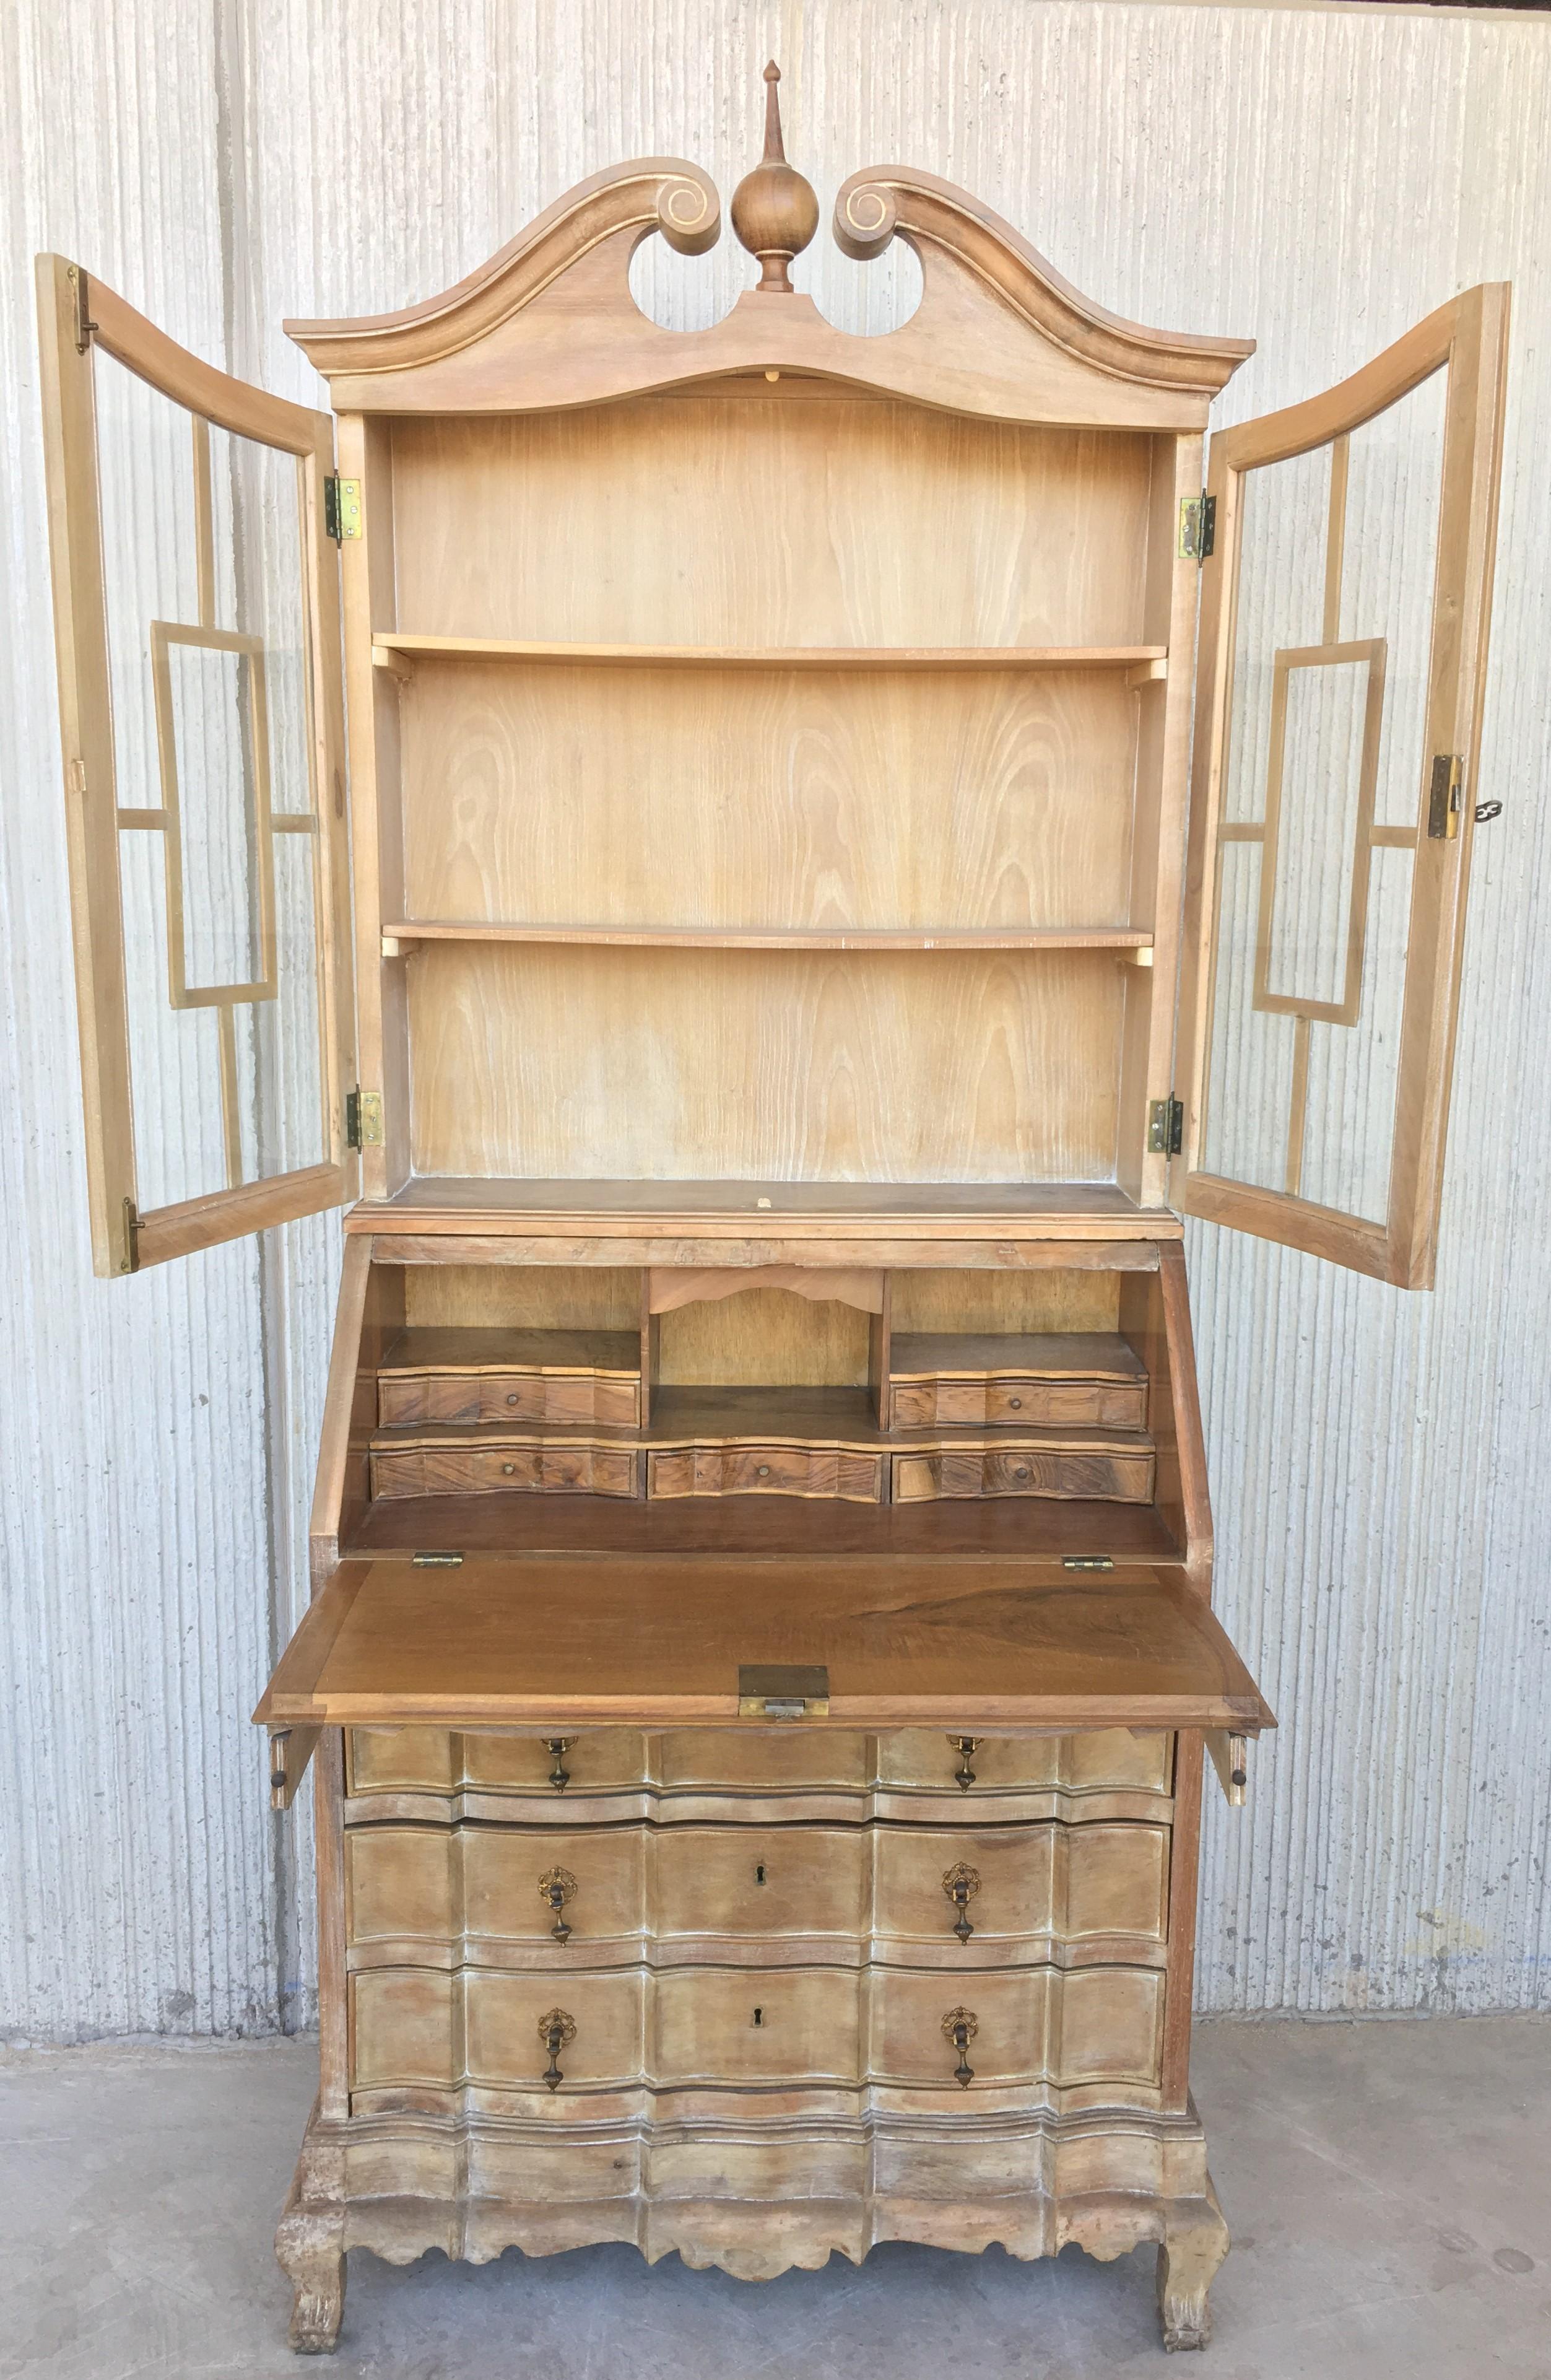 With a broken bonnet with rosette form ends and an urn form finial. The shaped burled wood double glass door opens to two shelves. The slant front opens to cubby holes, five drawers. All with brass bat wing hardware and escutcheons. Raised on